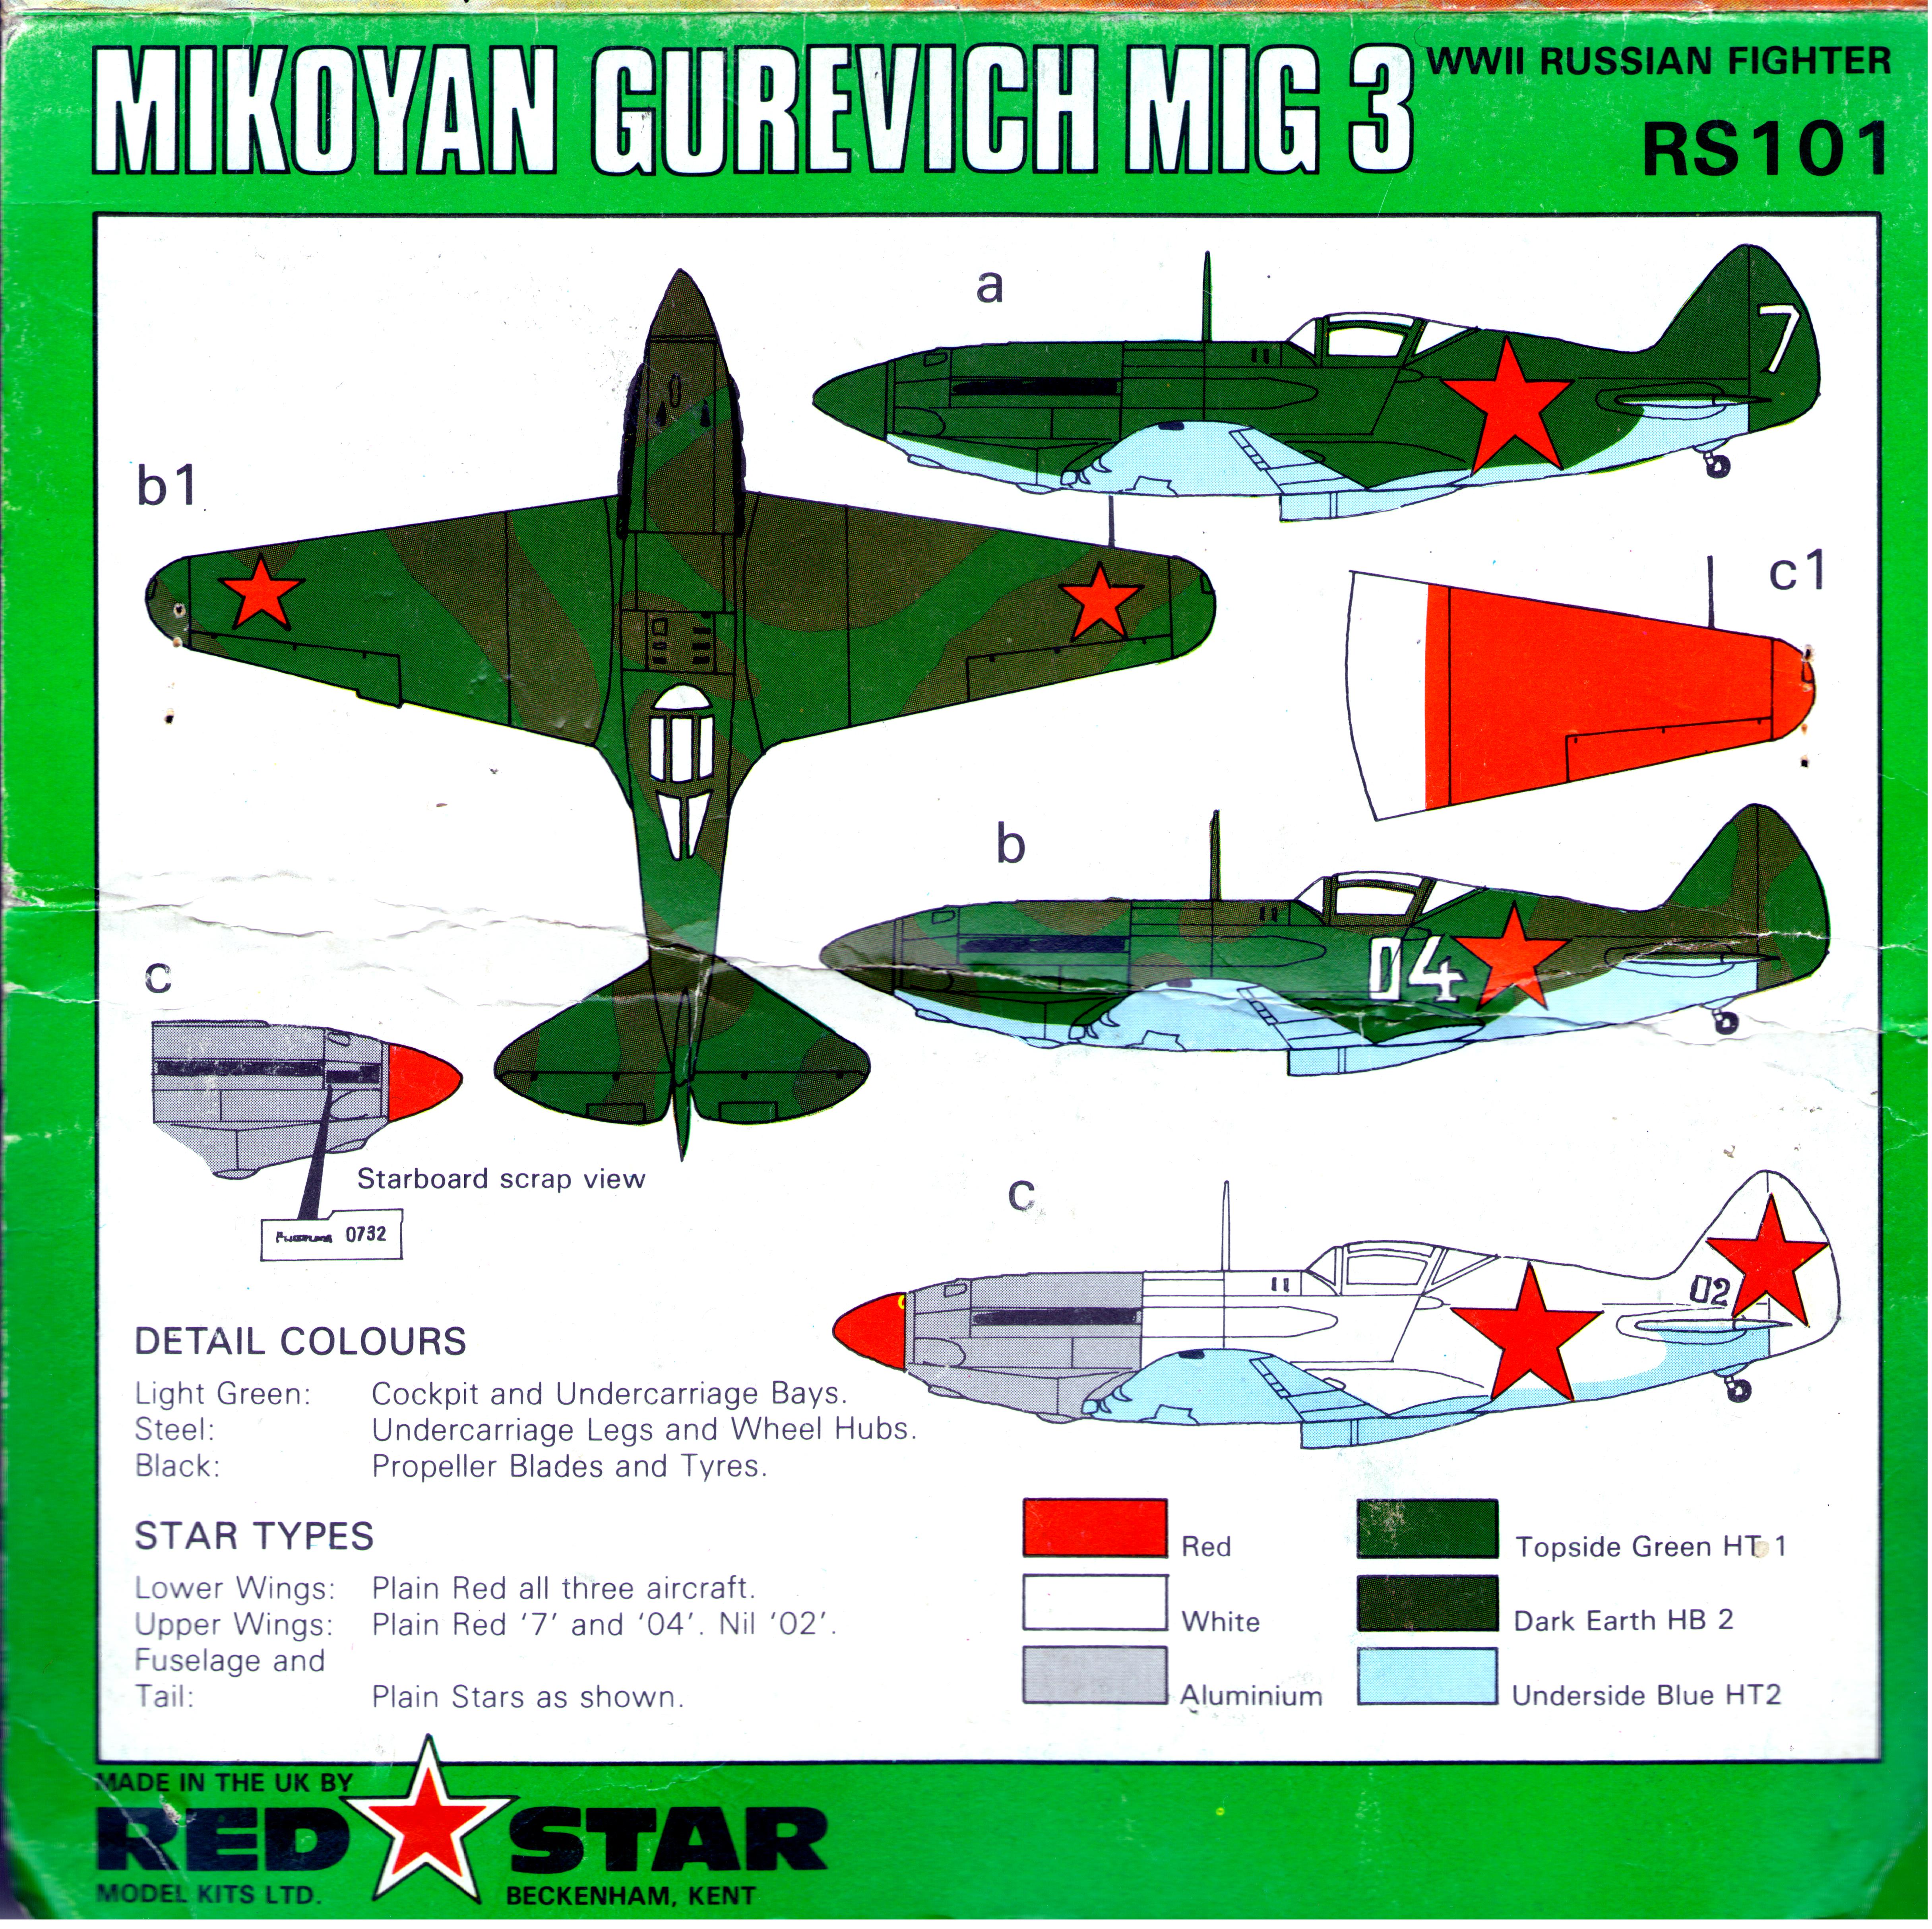 Red Star RS101 Mikoyan and Gurevich MiG-3, Red Star Model Kits Ltd, 1984 Colour painting guide